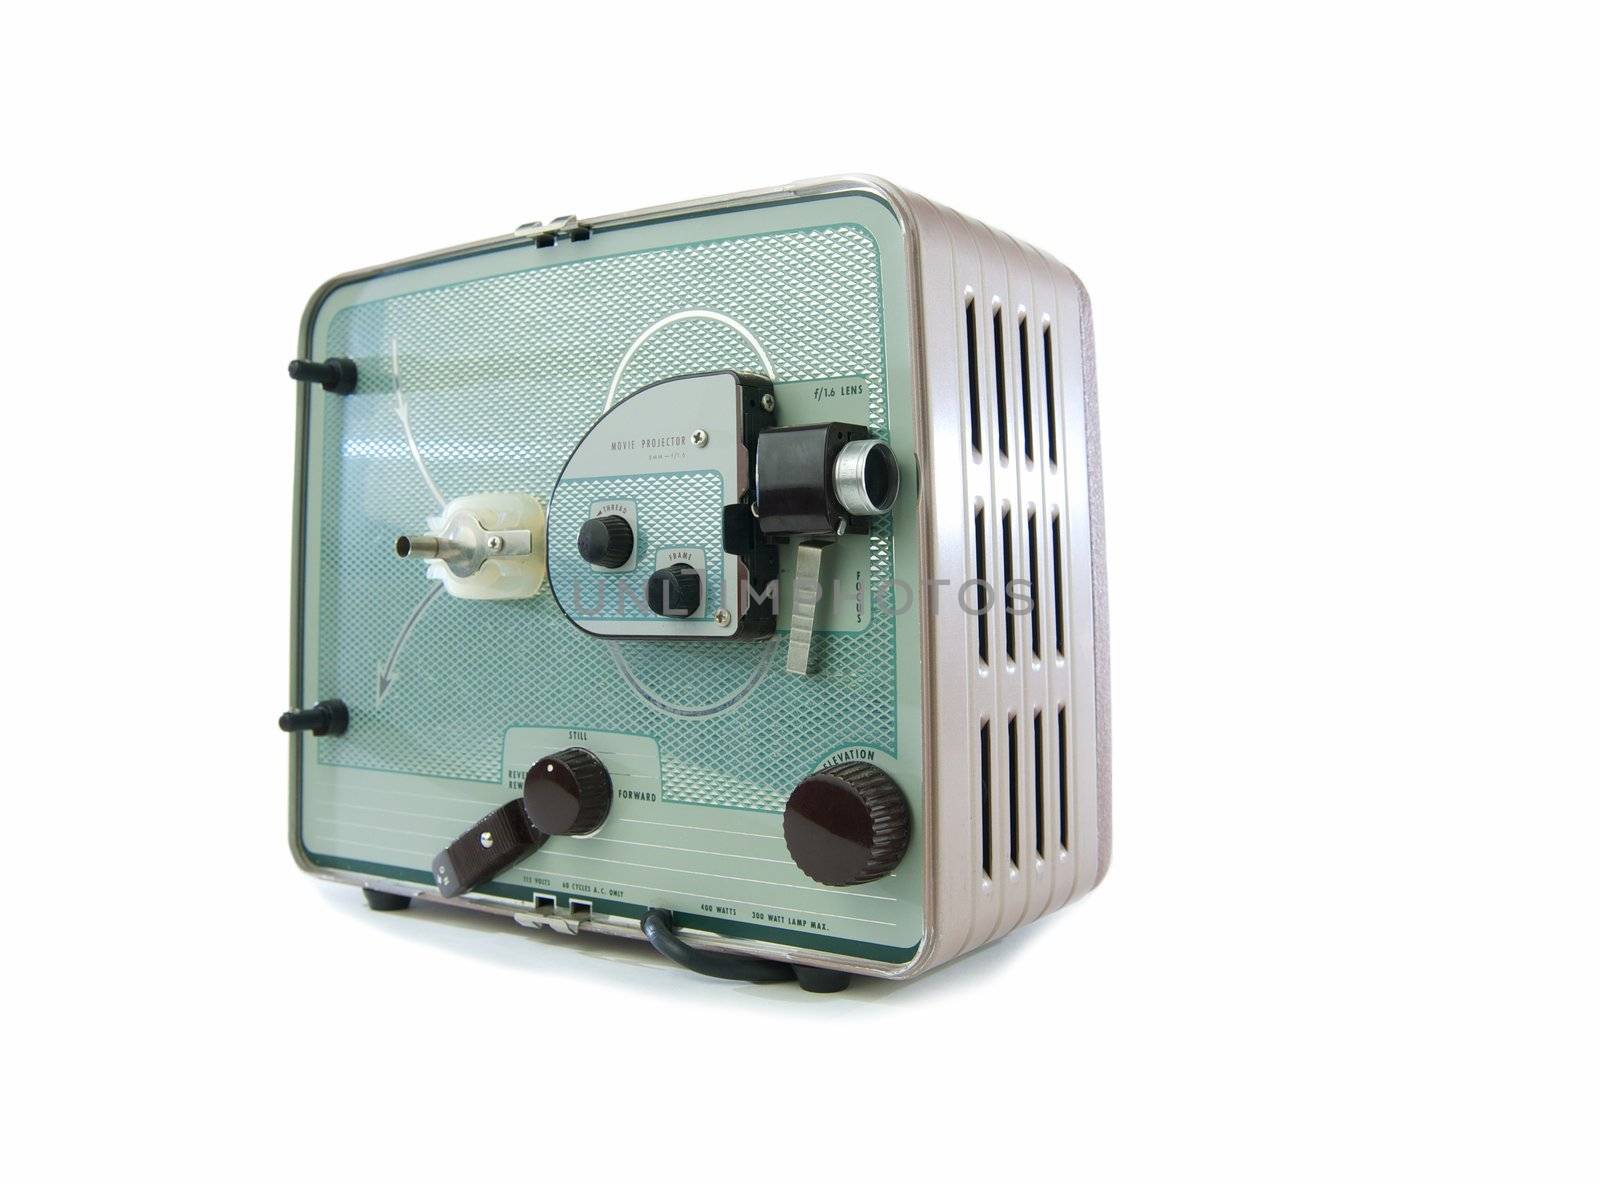 Vintage 8mm Home Movie Projector on Angle by pixelsnap